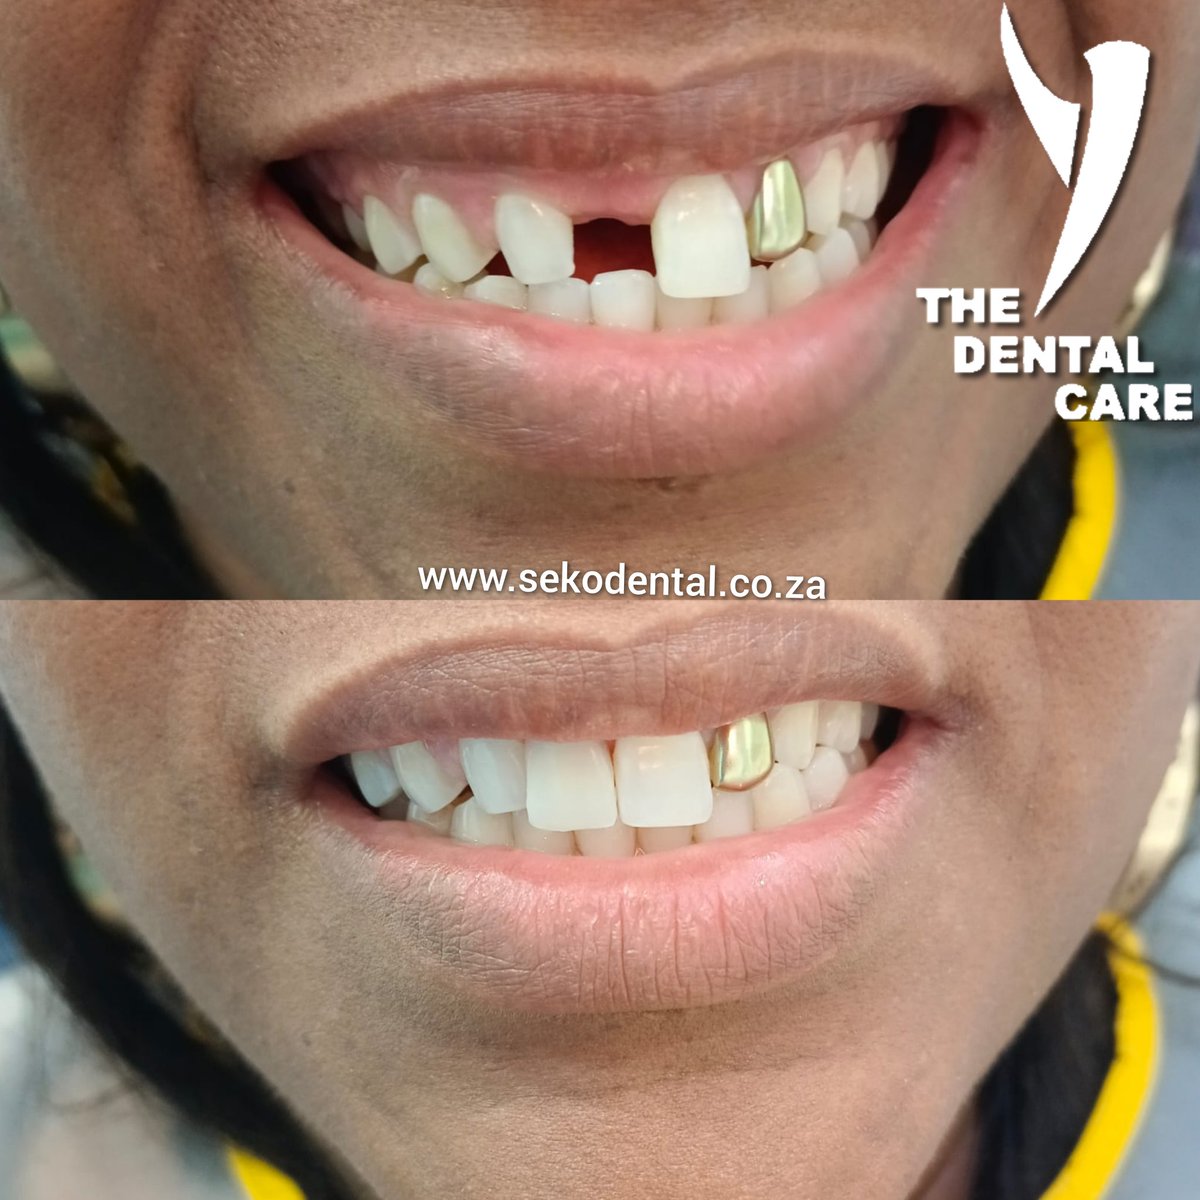 'Restore your smile and confidence by replacing missing teeth! Whether through dental implants or bridges, modern dentistry offers effective solutions for a brighter, happier smile. #DentalHealth #SmileRestoration'sekodental.co.za